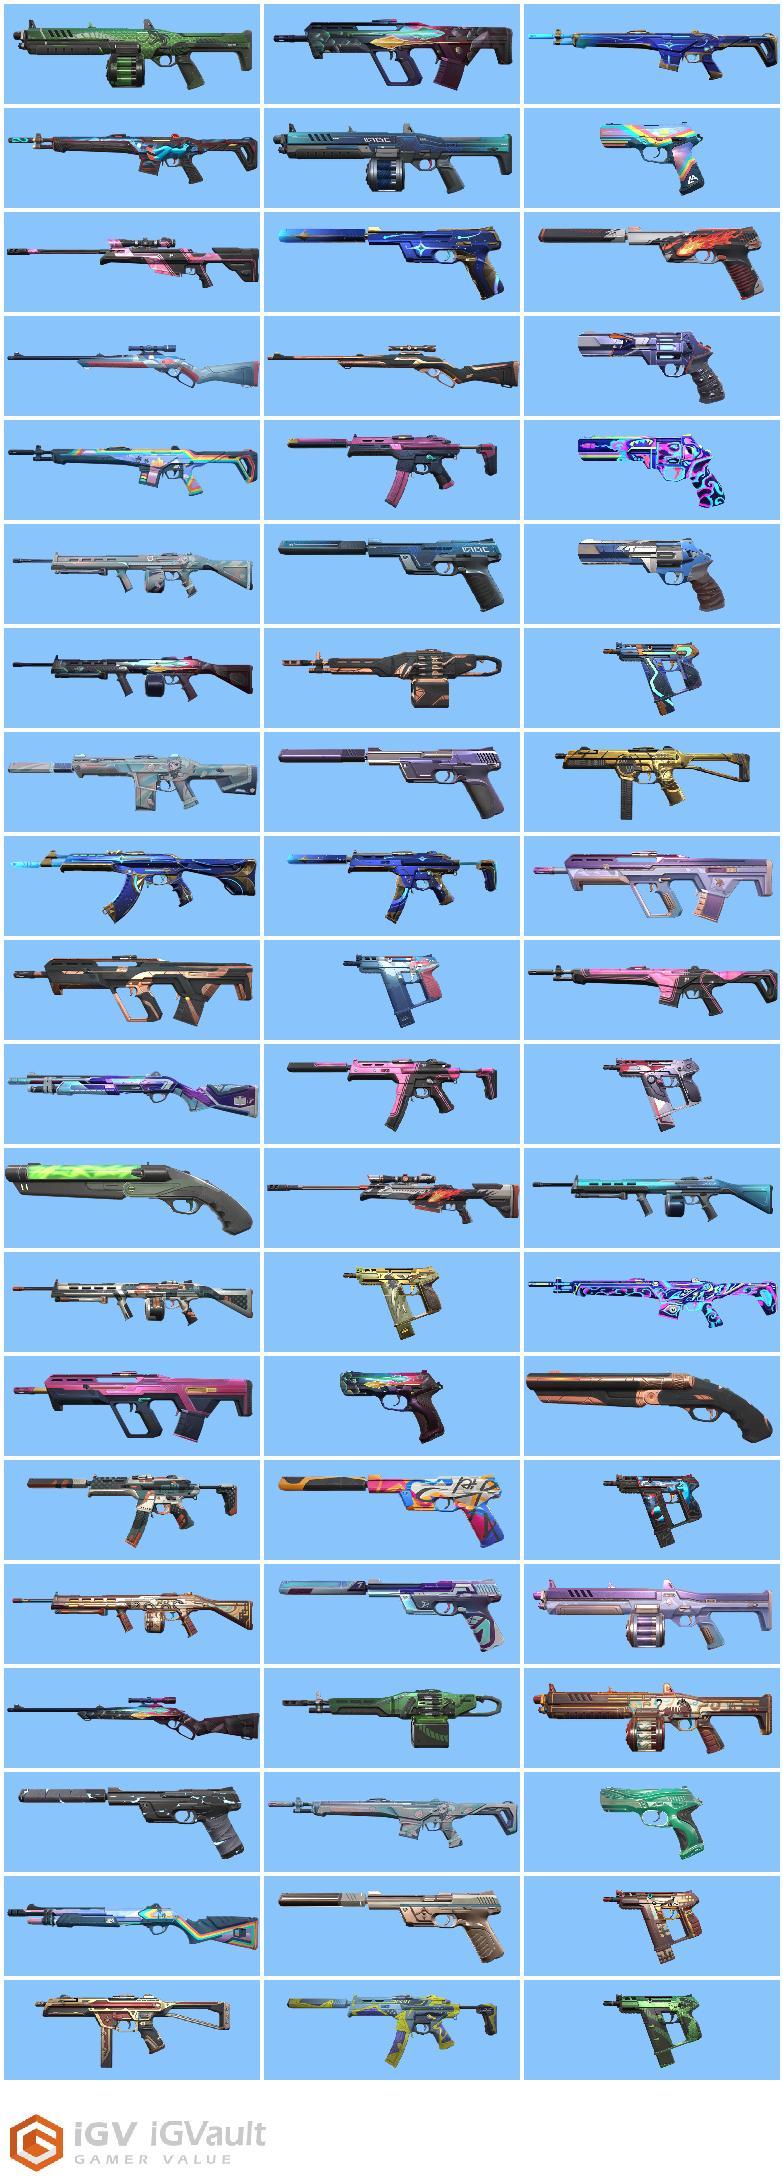 EUROPE / 196 SKINS (RadiantPhantom+Chaos Vandal+Sentinels+Araxys) + 19 RARE KNIVES / MAIL (FULL ACCESS) / LUX QUALITY 